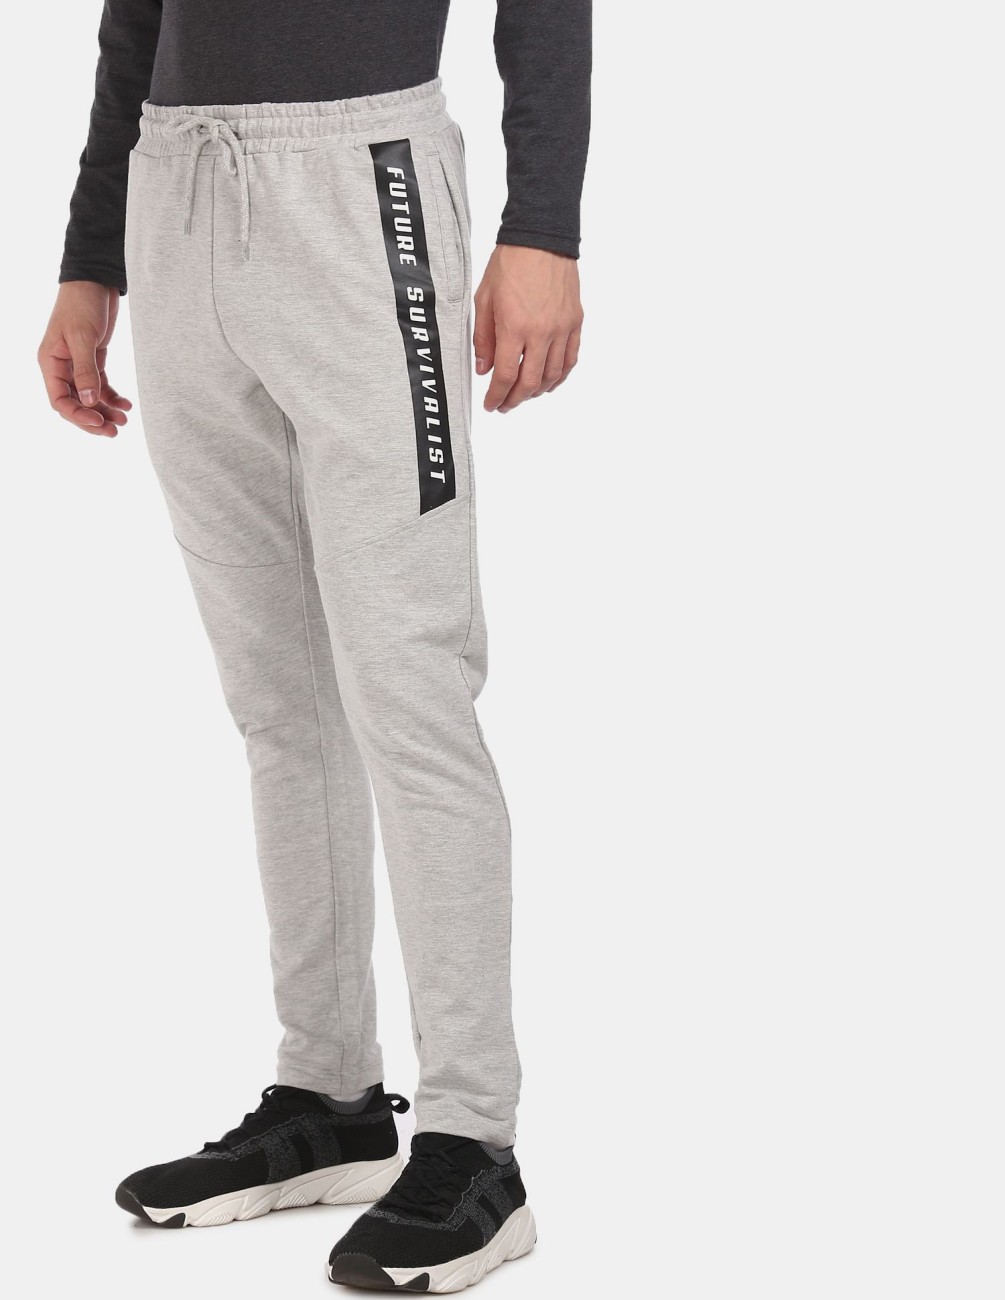 Buy FLYING MACHINE Black Solid Polyester Cotton Regular Fit Mens Track Pants   Shoppers Stop